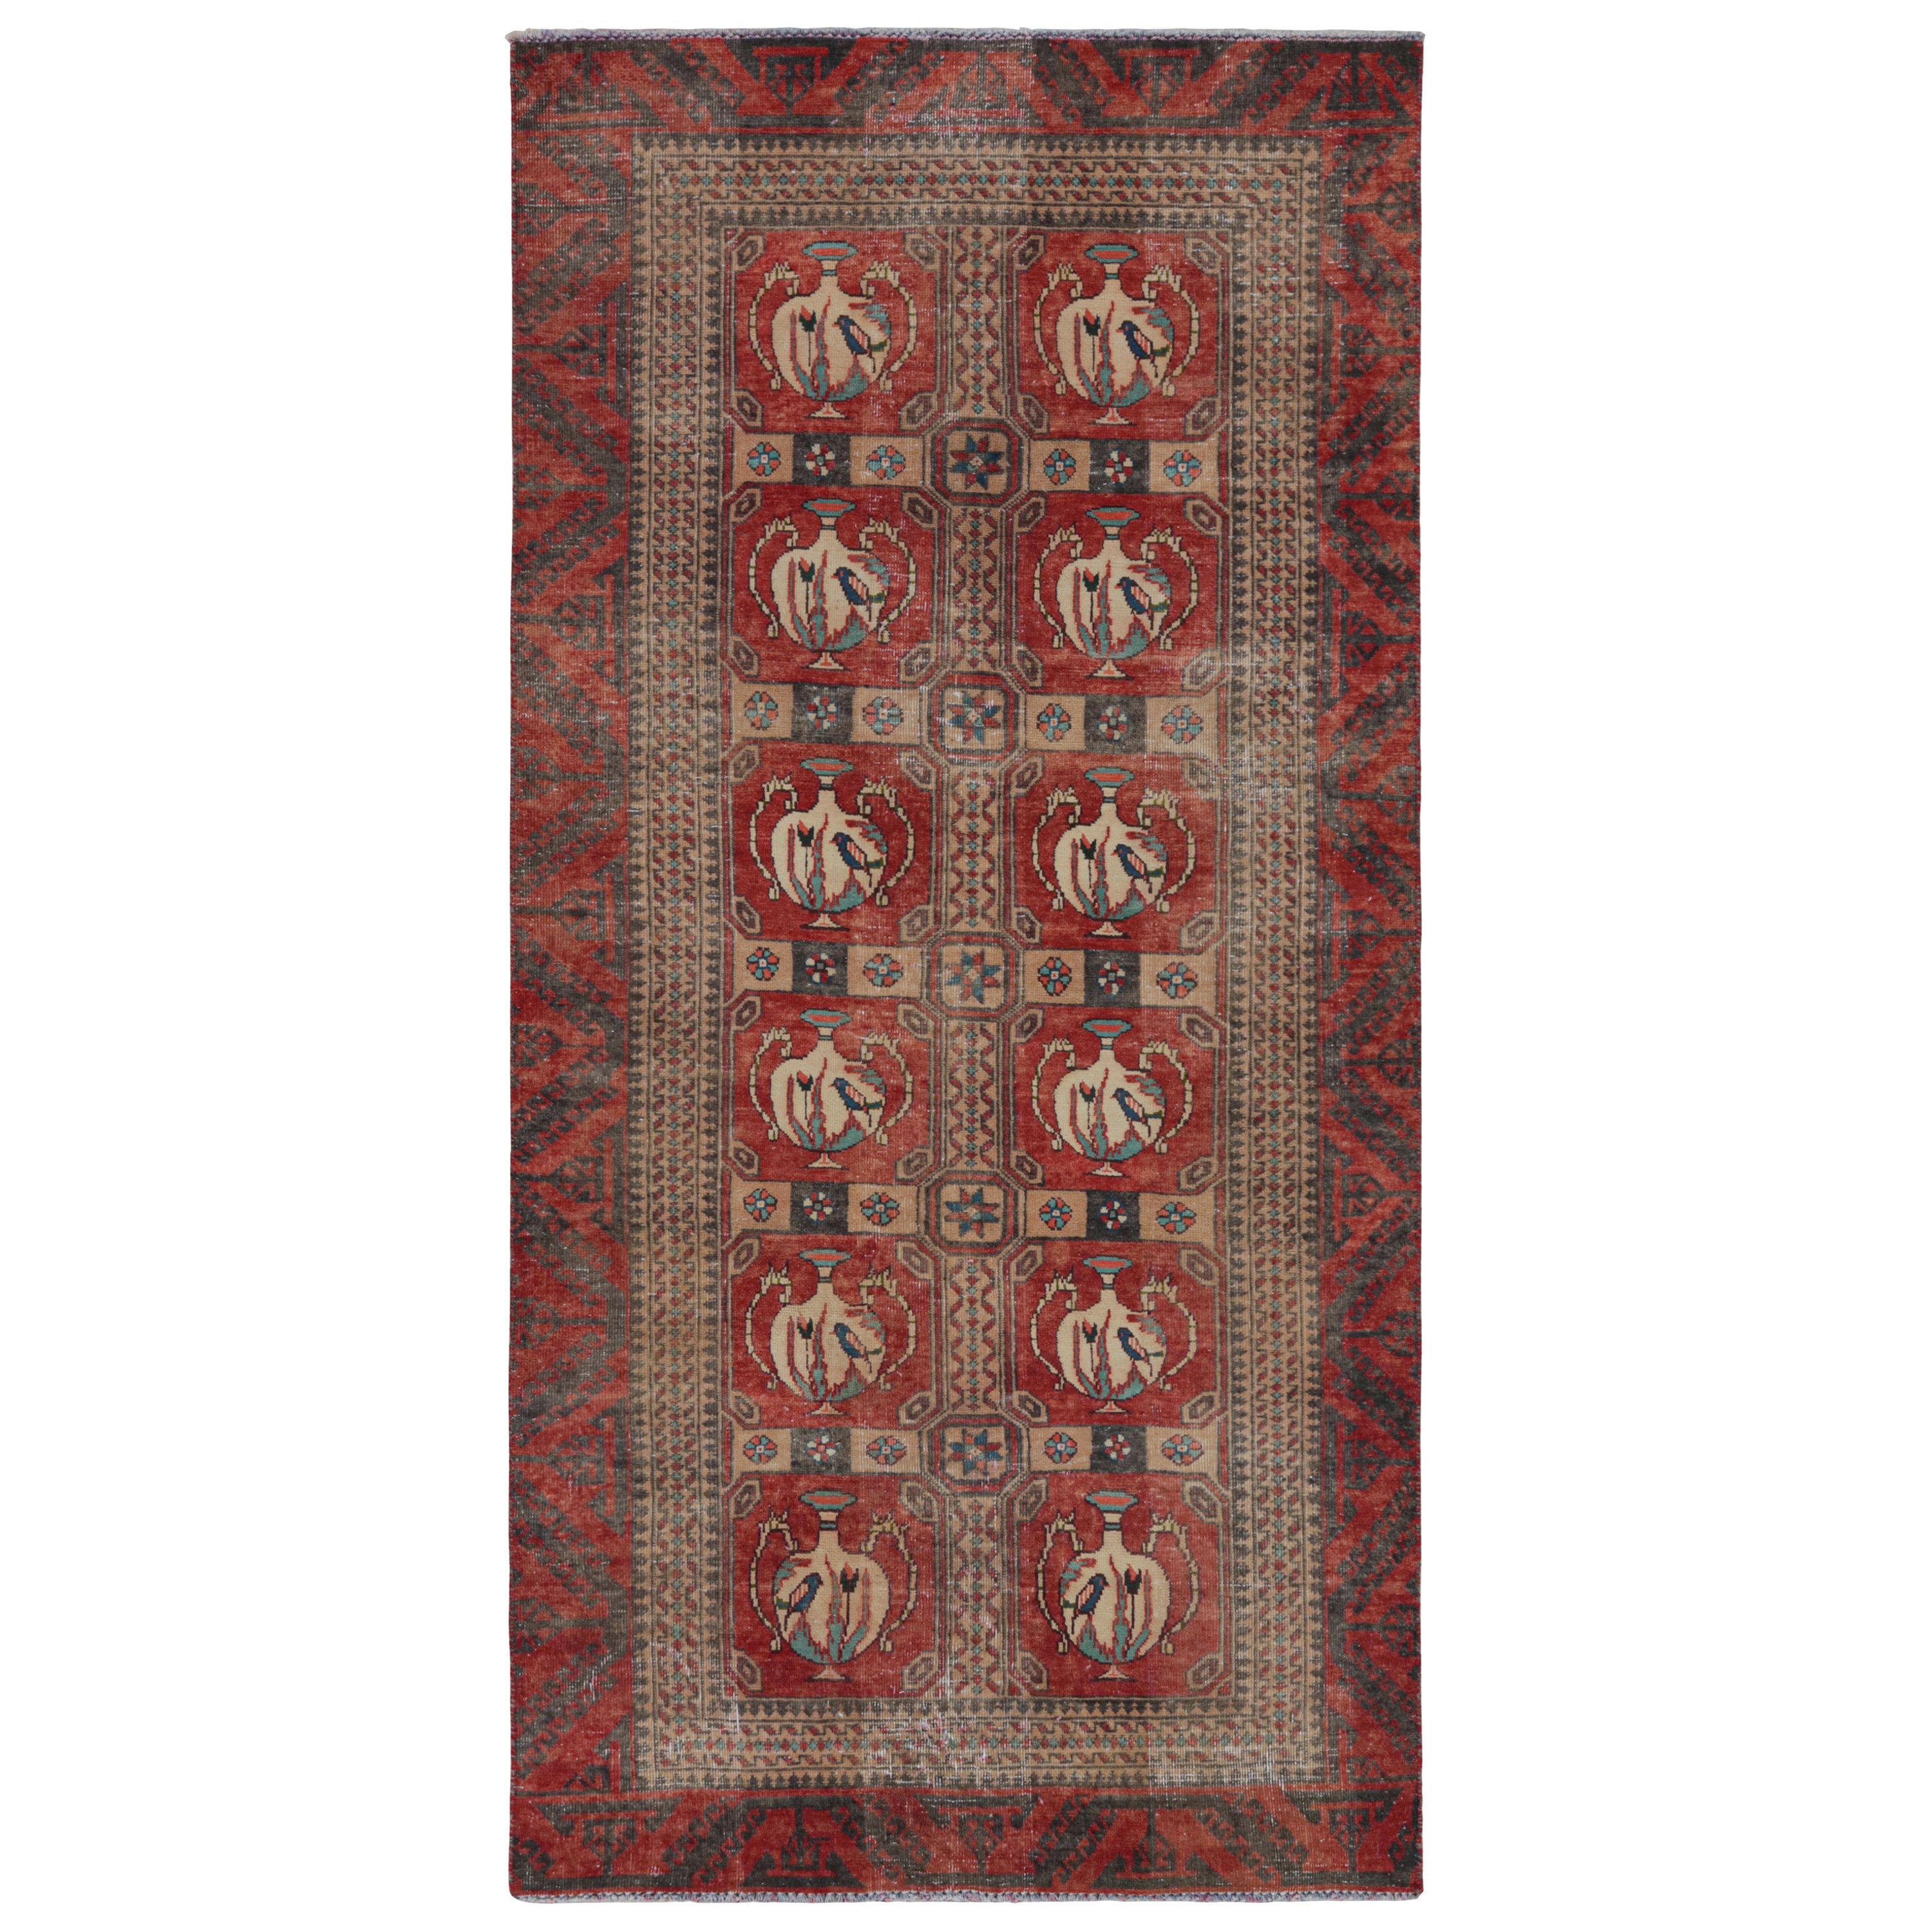 Vintage Persian Shiraz runner rug in Red, Beige & Blue Pictorial Patterns For Sale